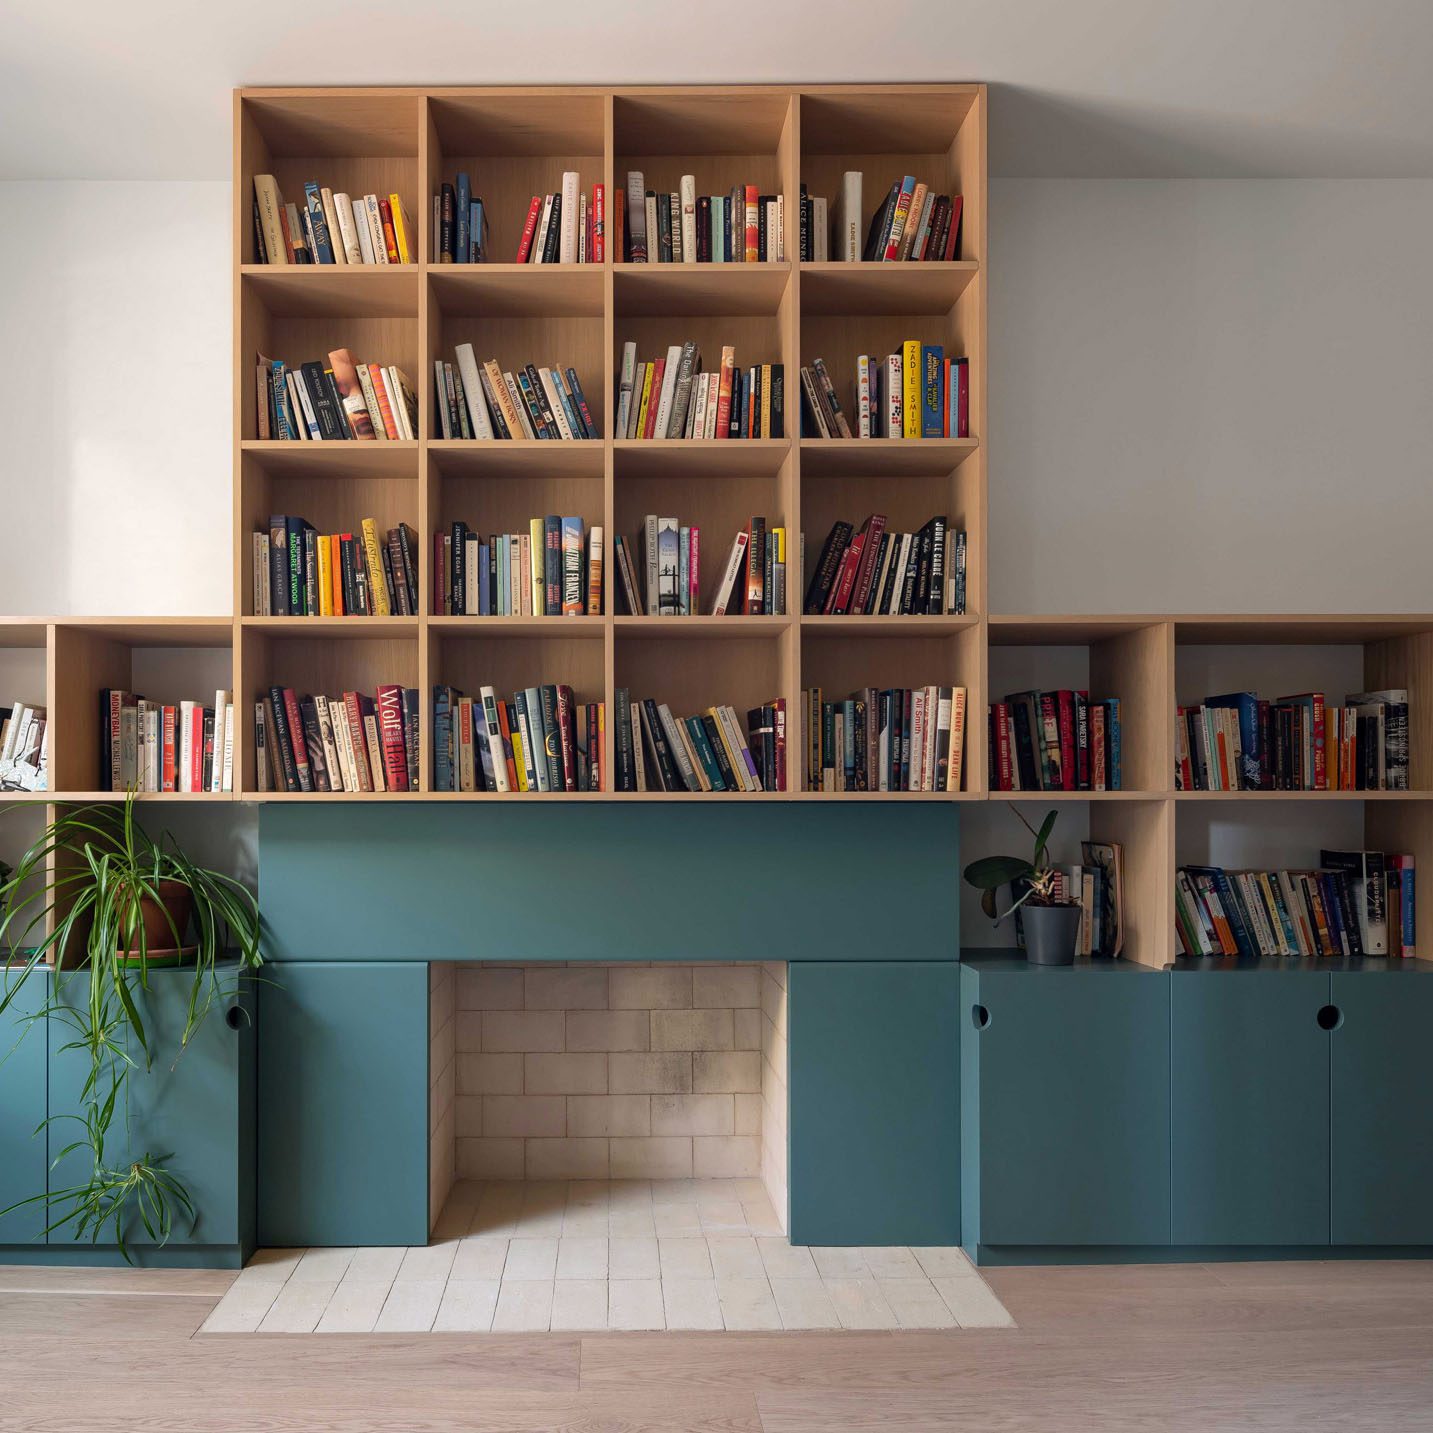 Teal fireplace with oak bookshelves above